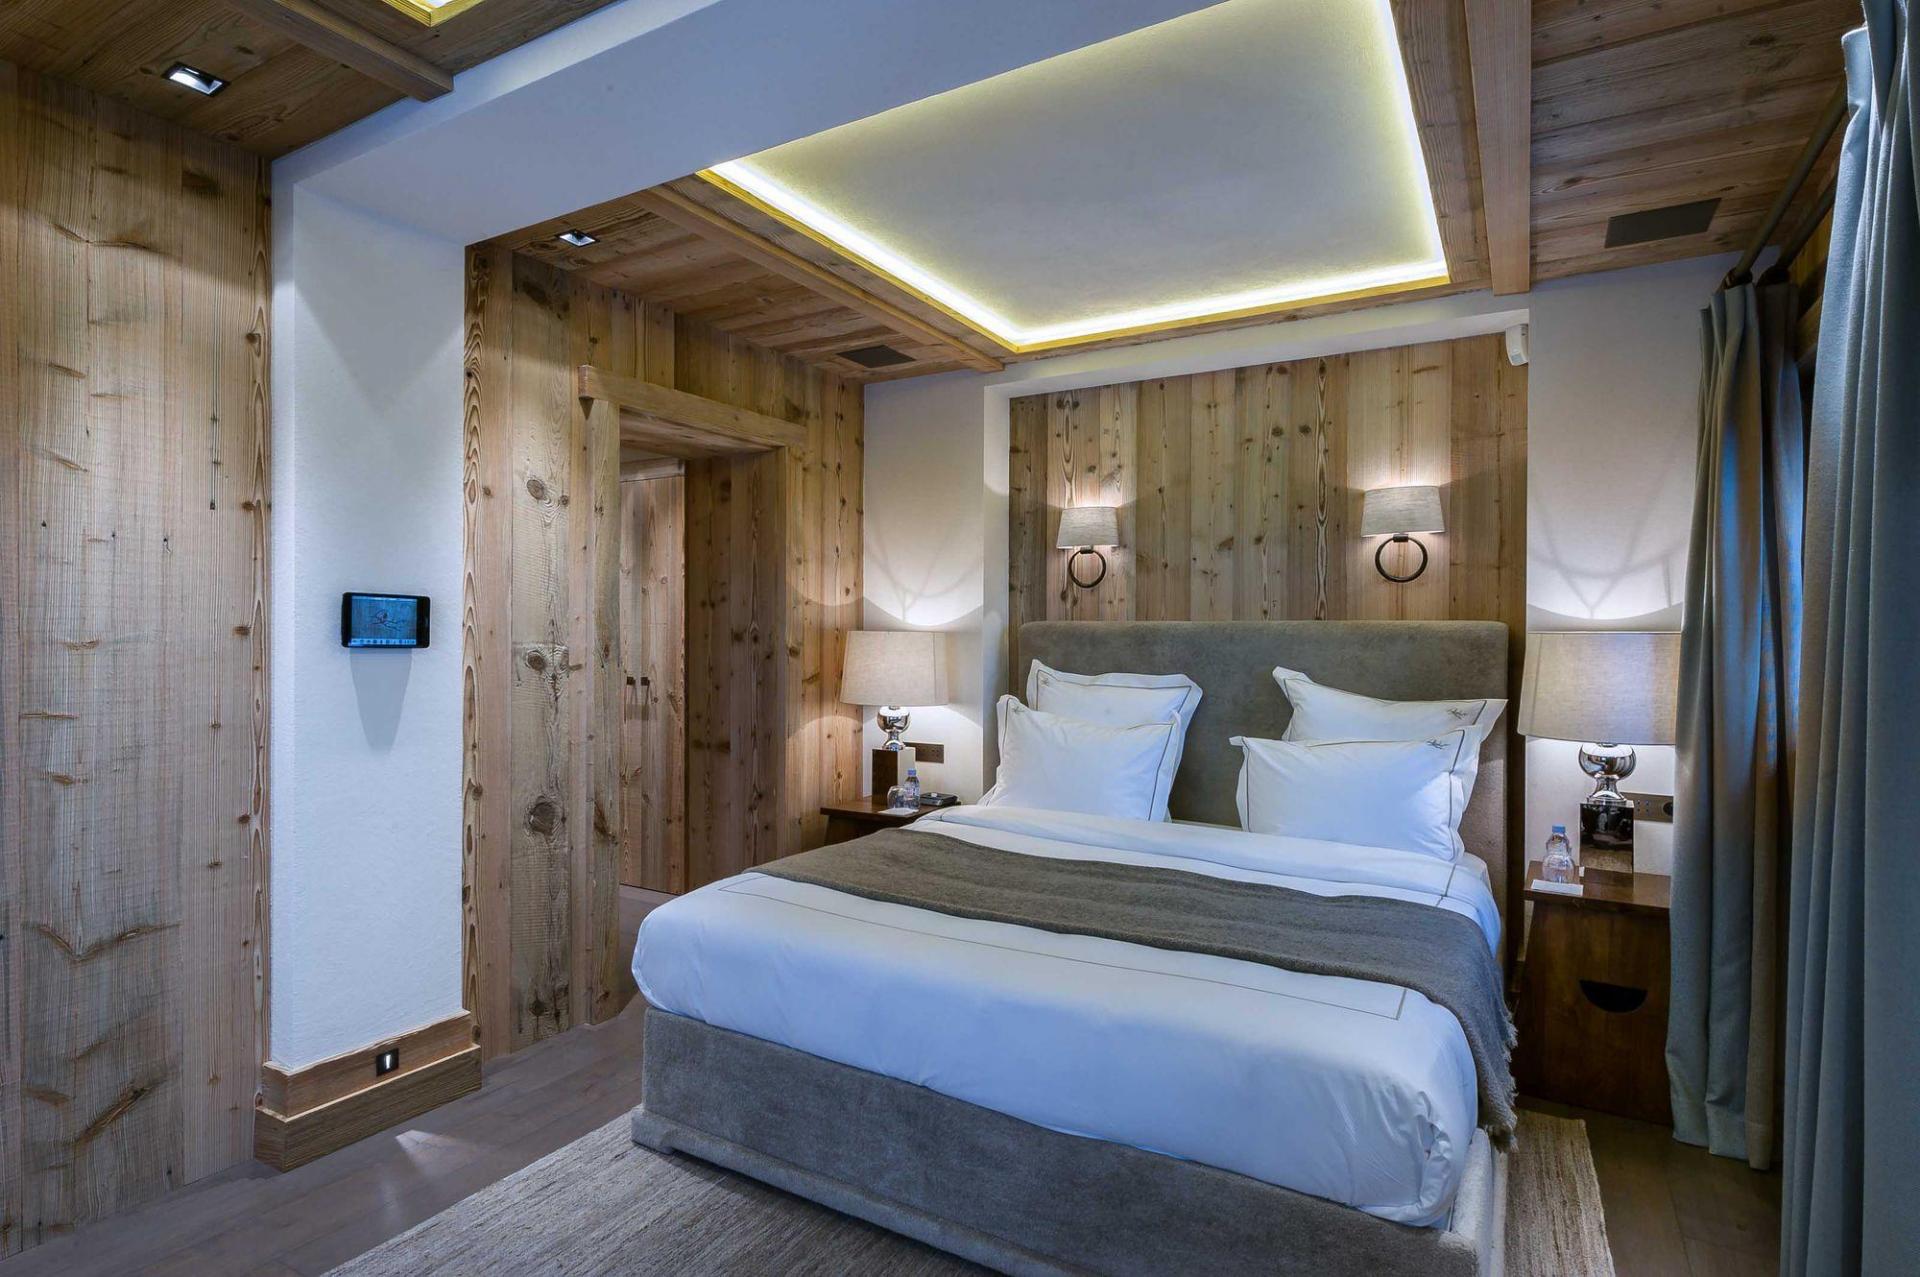 ONE OF THE BEDROOMS IN A CHALET RENTAL IN COURCHEVEL